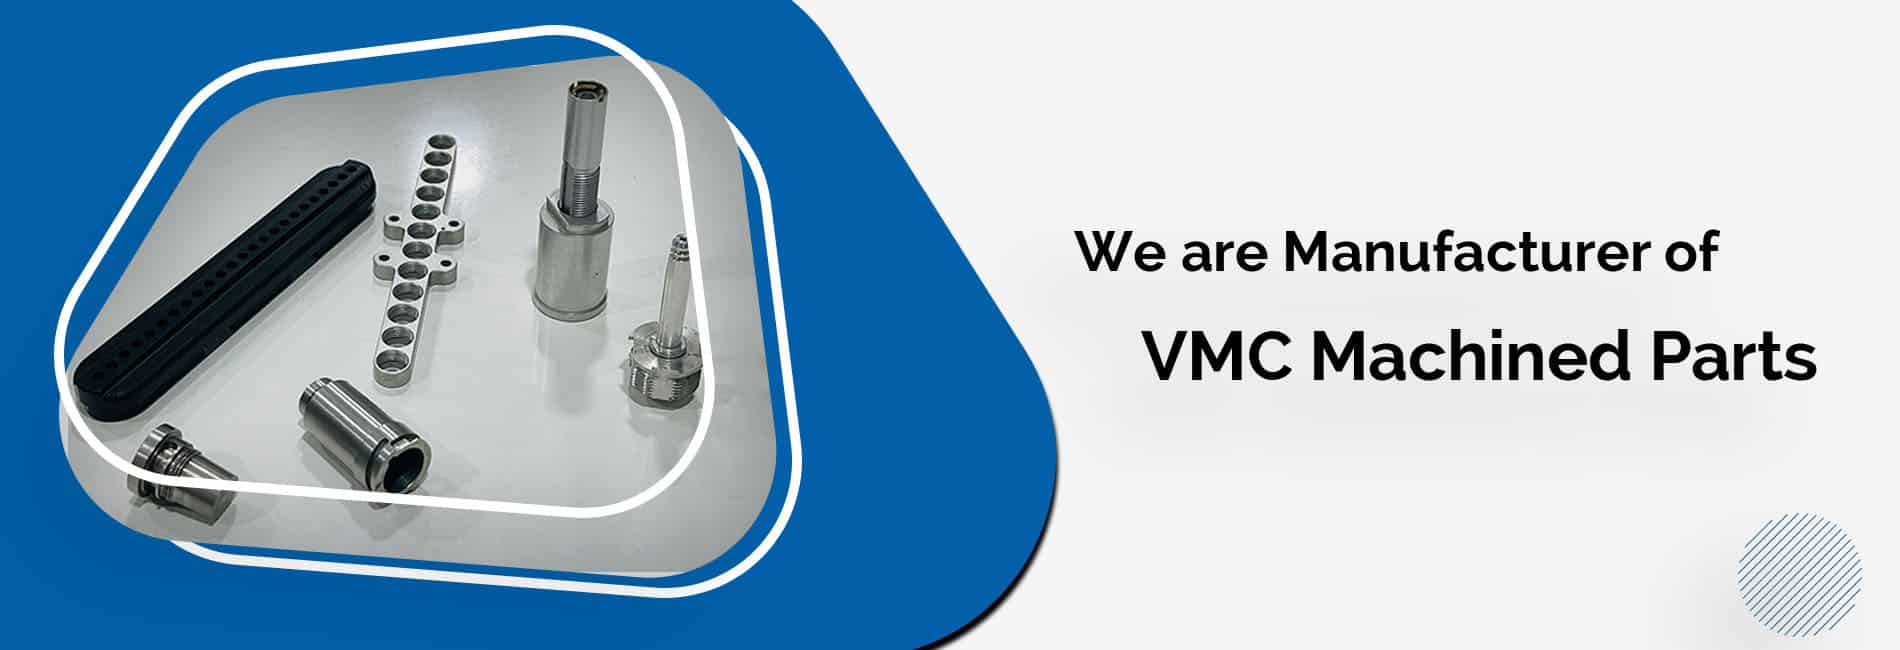 Manufacturer of VMC Machined Parts and components